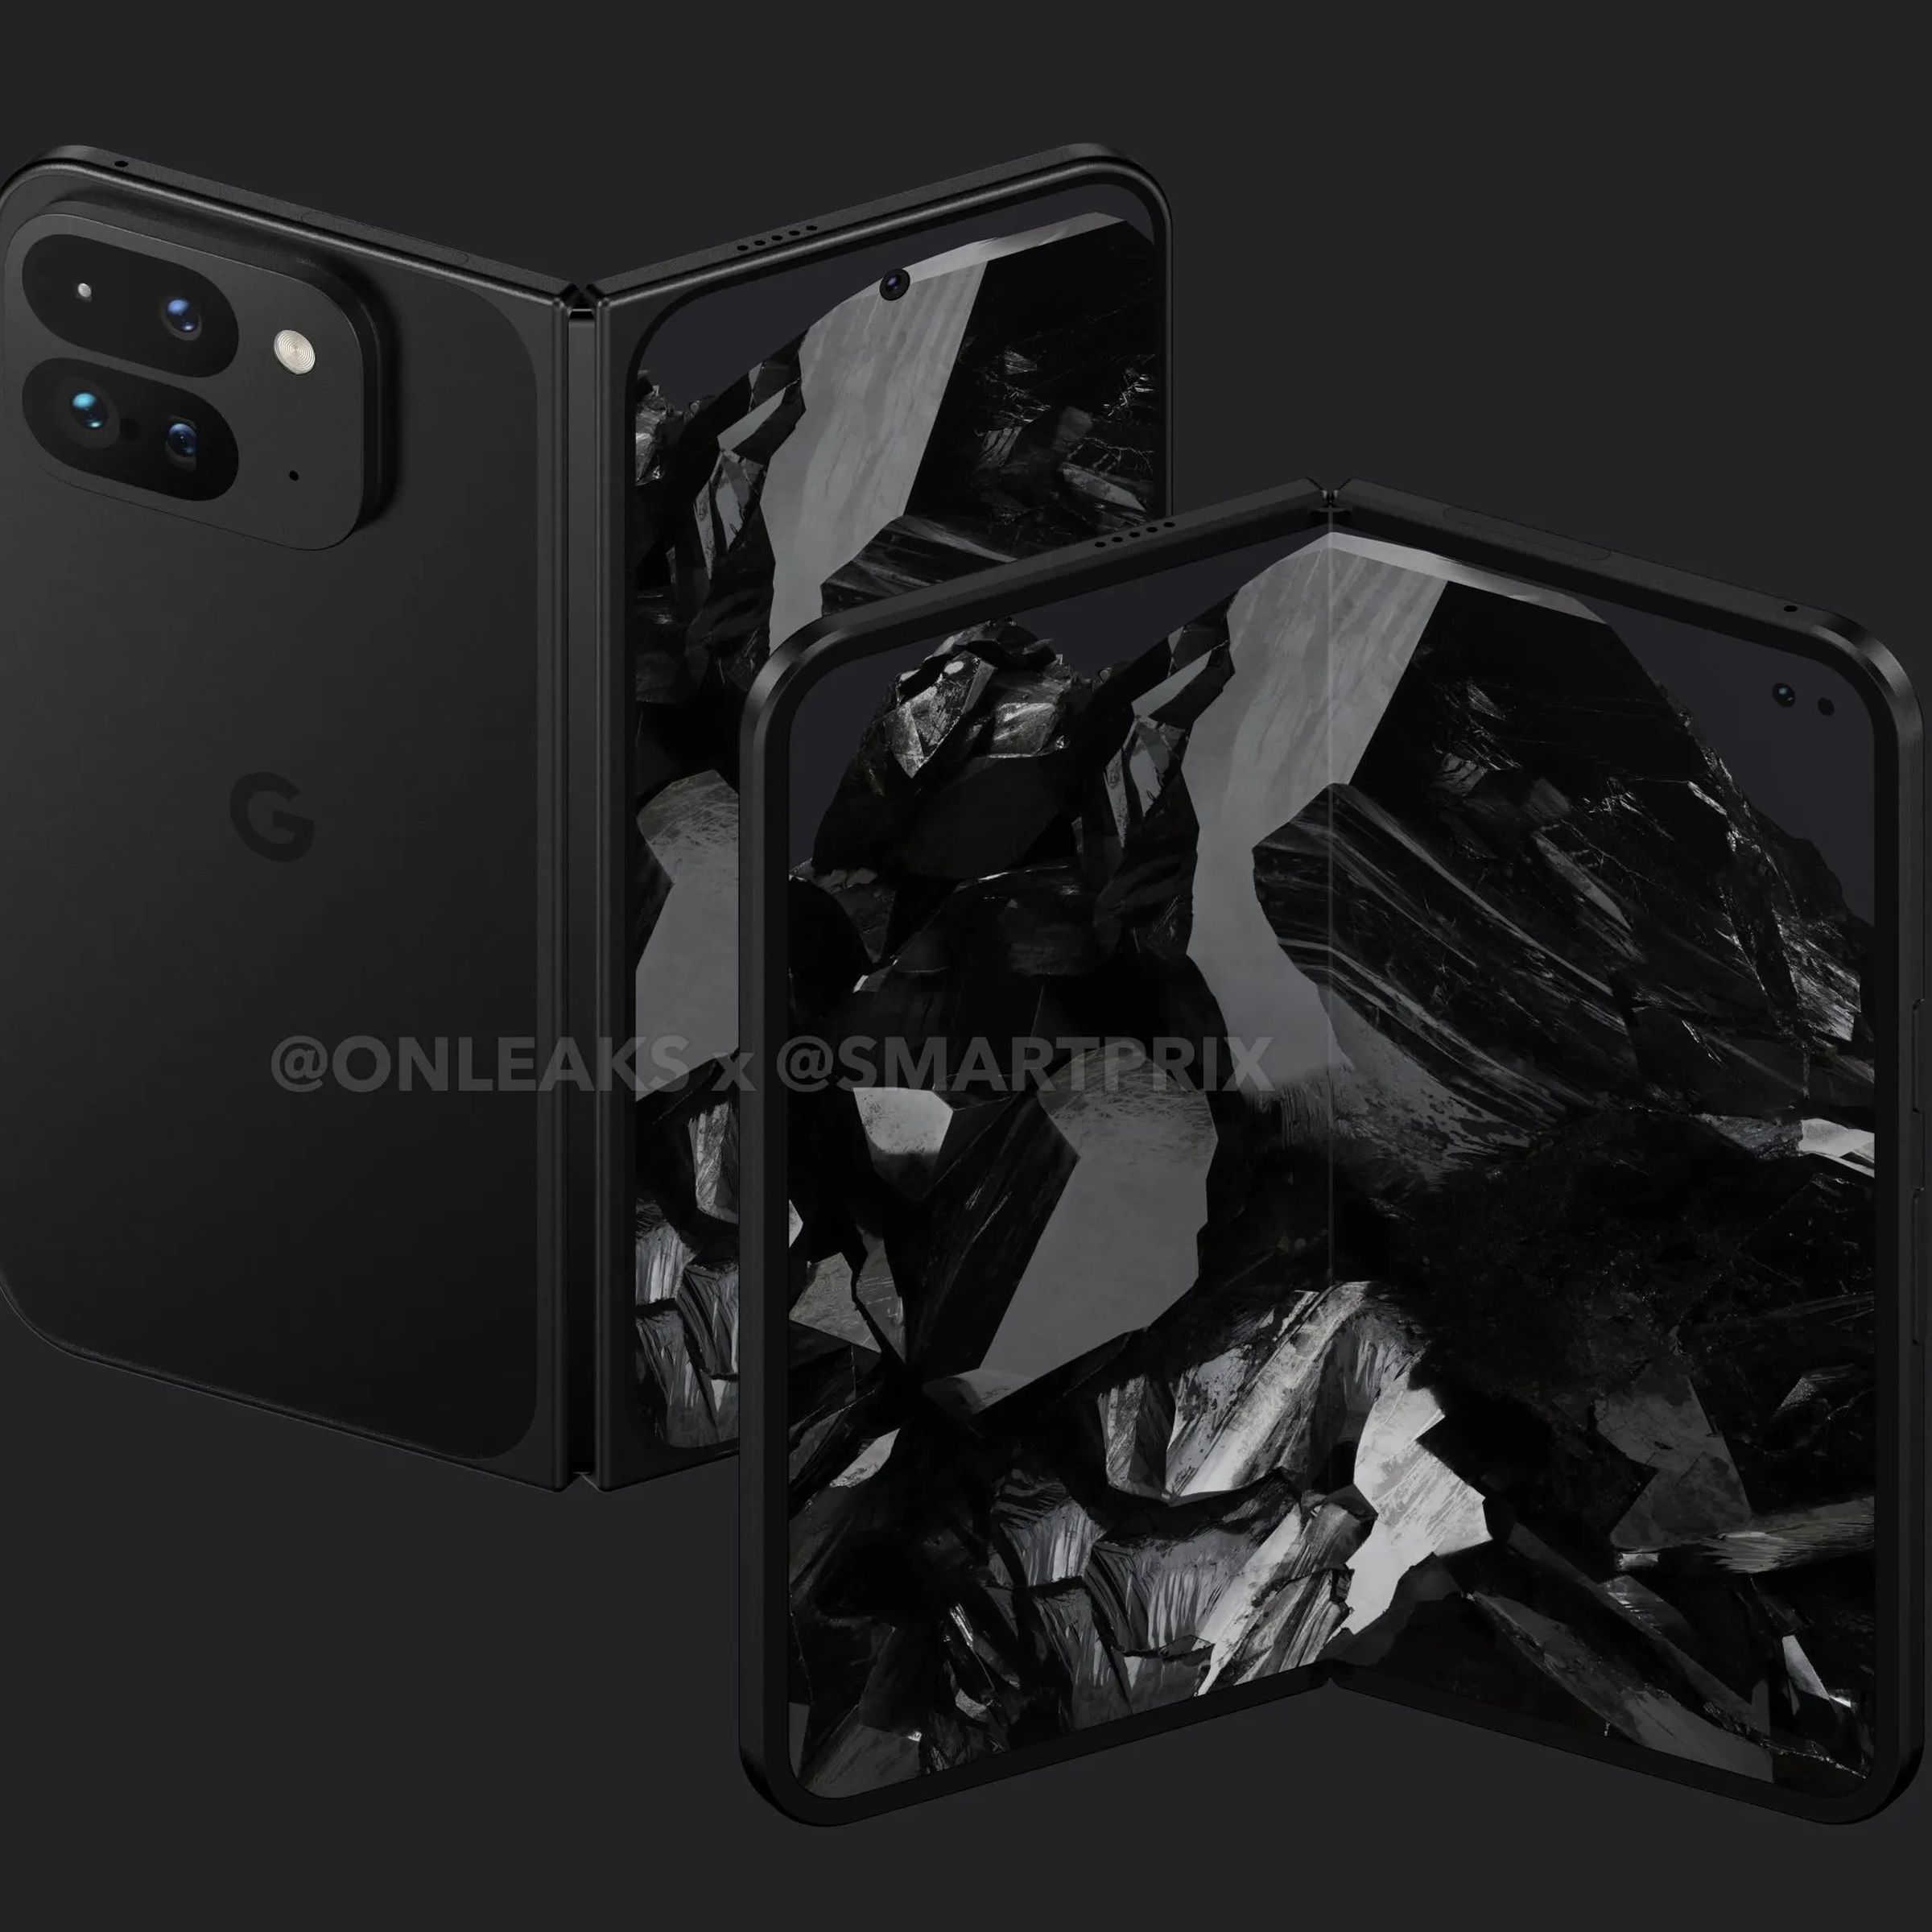 A leaked render that appears to show the Google Pixel Fold 2